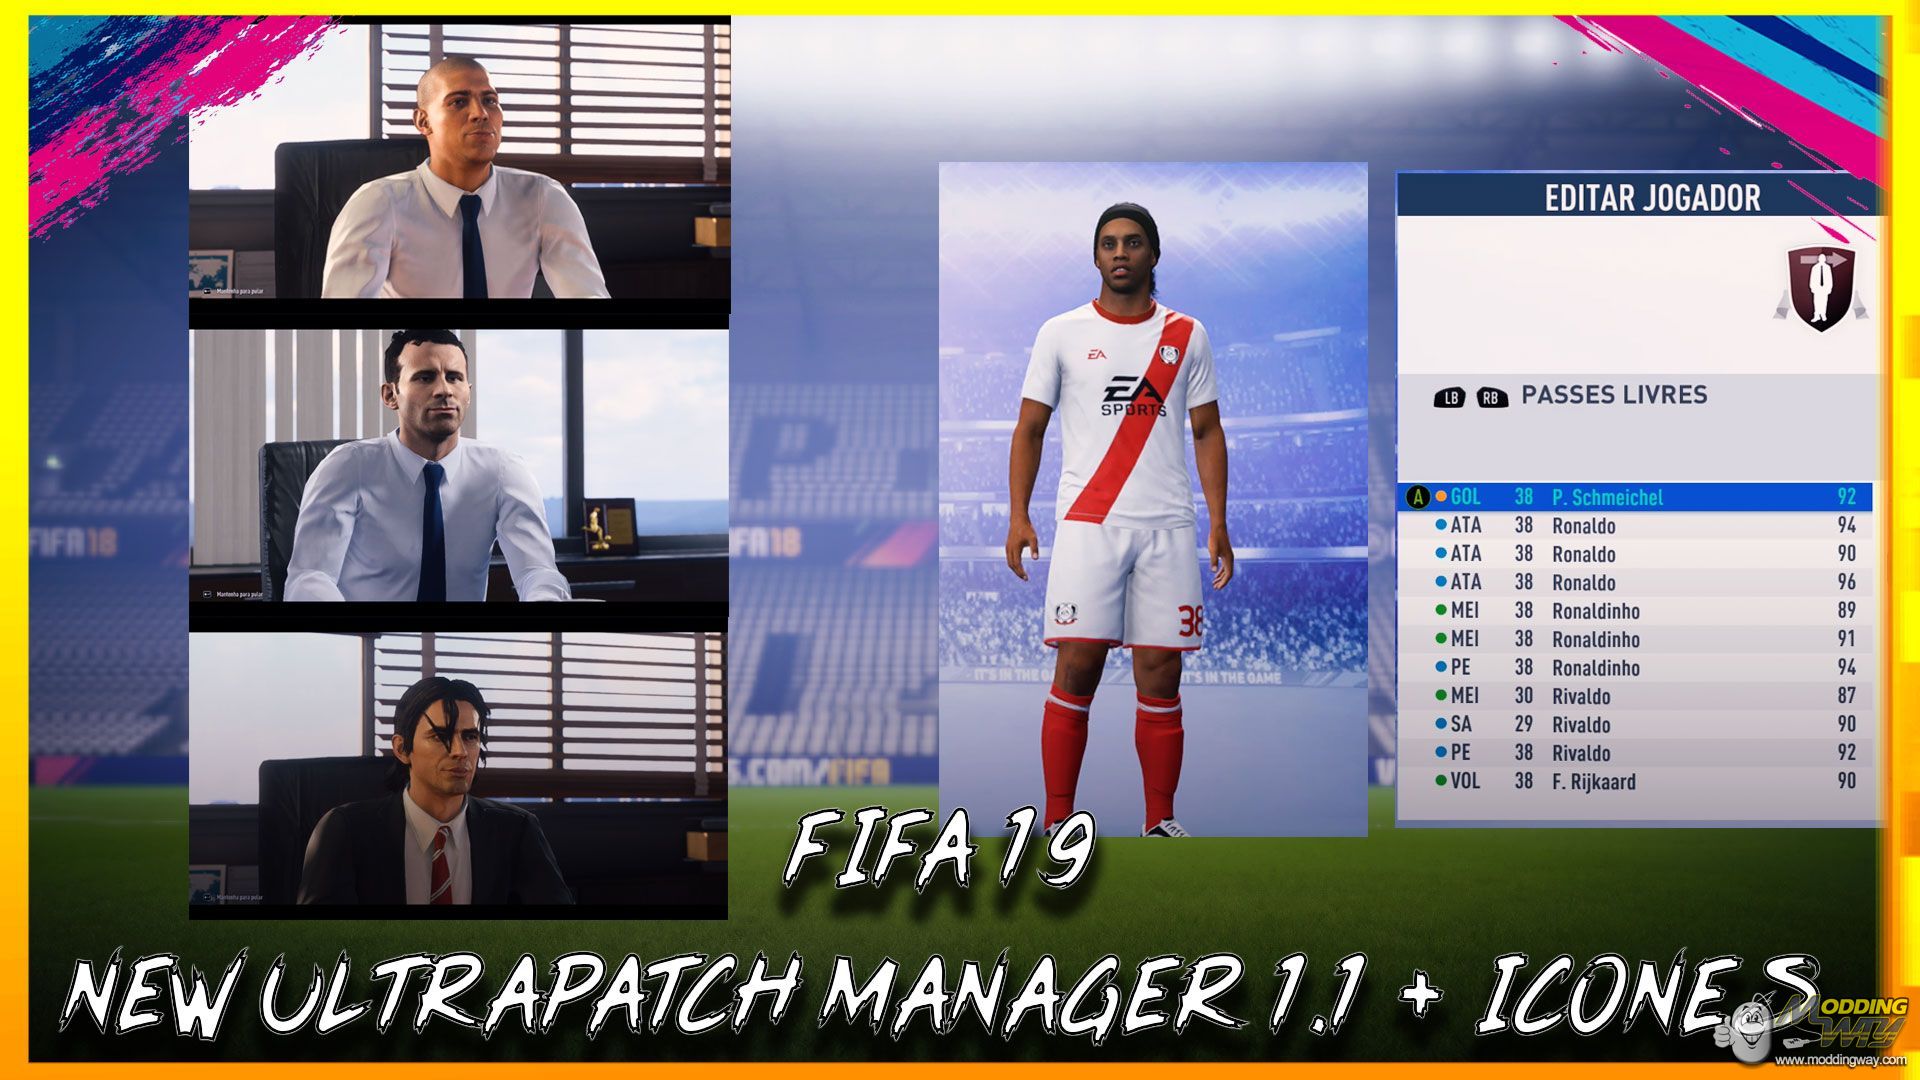 Frosty manager fifa 19